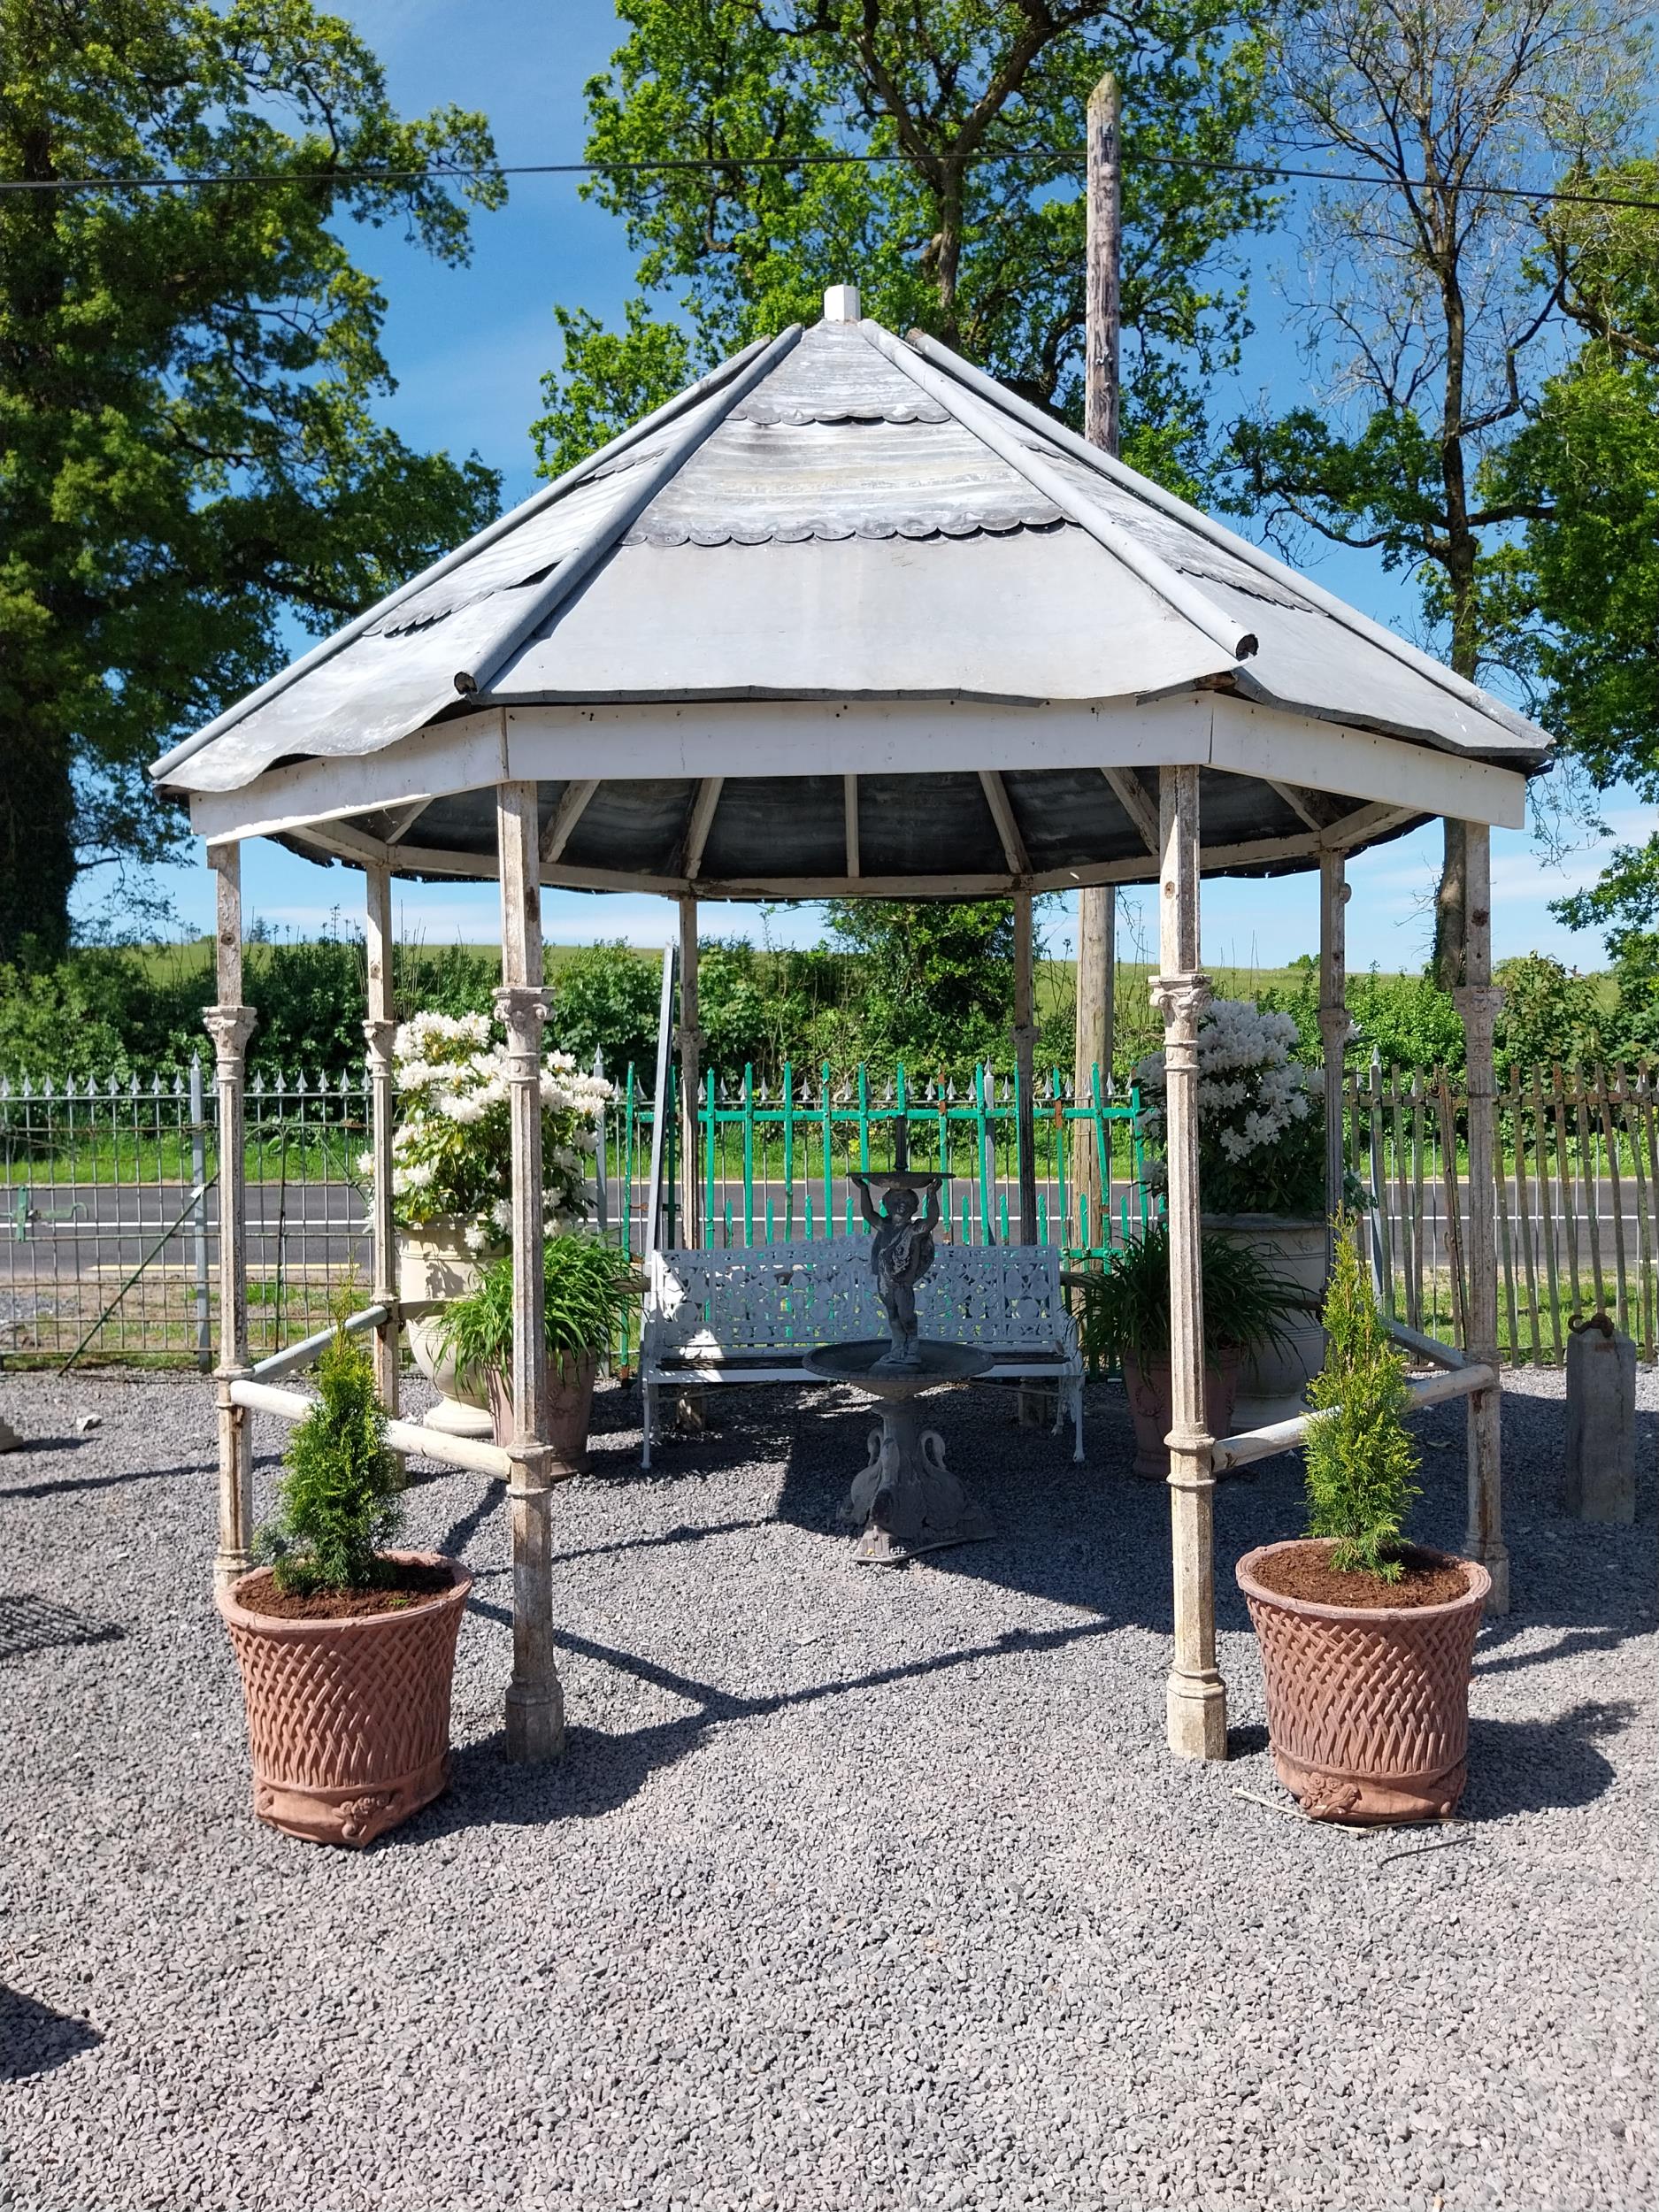 Rare 19th C. band stand with cast iron Corinthian columns, timbre frame and zinc roof originally